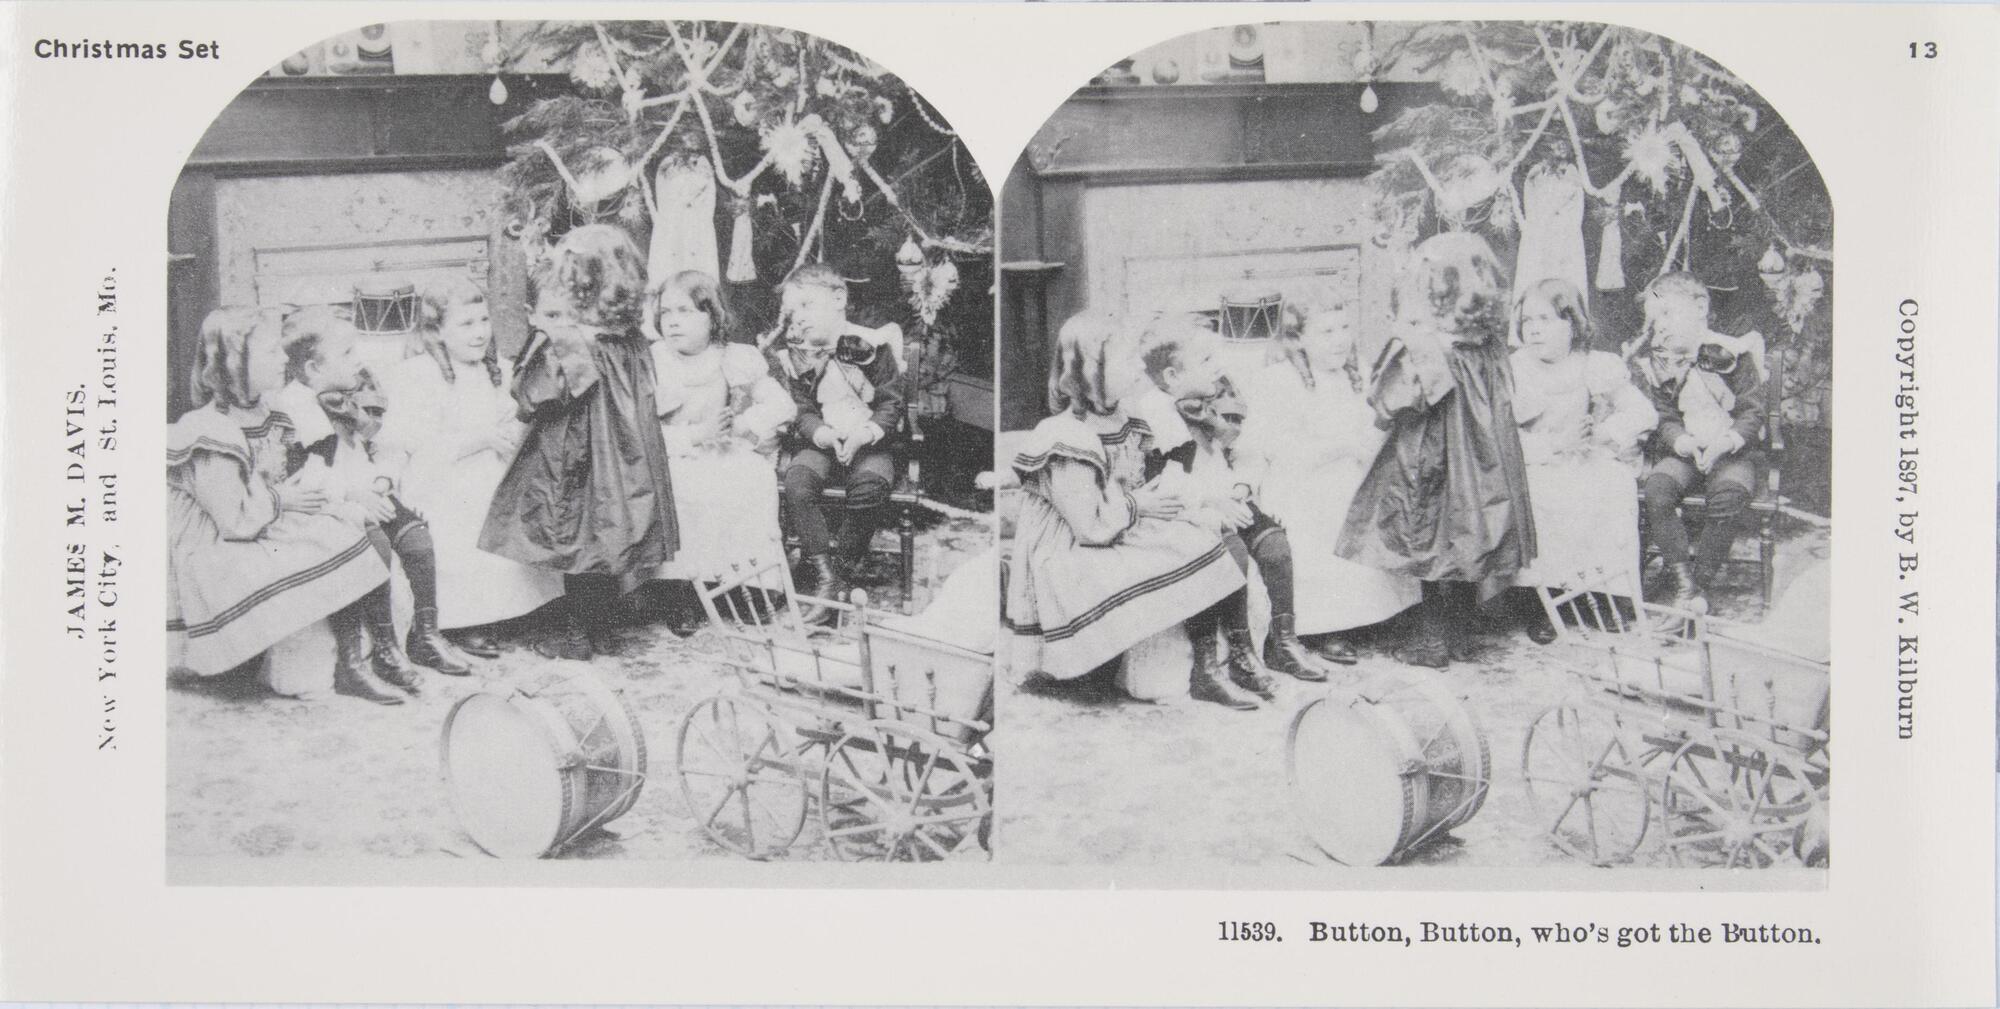 This black and white stereoscopic image features two images of five seated small children looking at a standing little girl by a Christmas tree and a fireplace surrounded by toys.  It is surrounded by the text: Christmas Set; James M. Davis; Copyright 1897, by B. W. Kilburn; 11539. Button, Button, who’s got the Button.